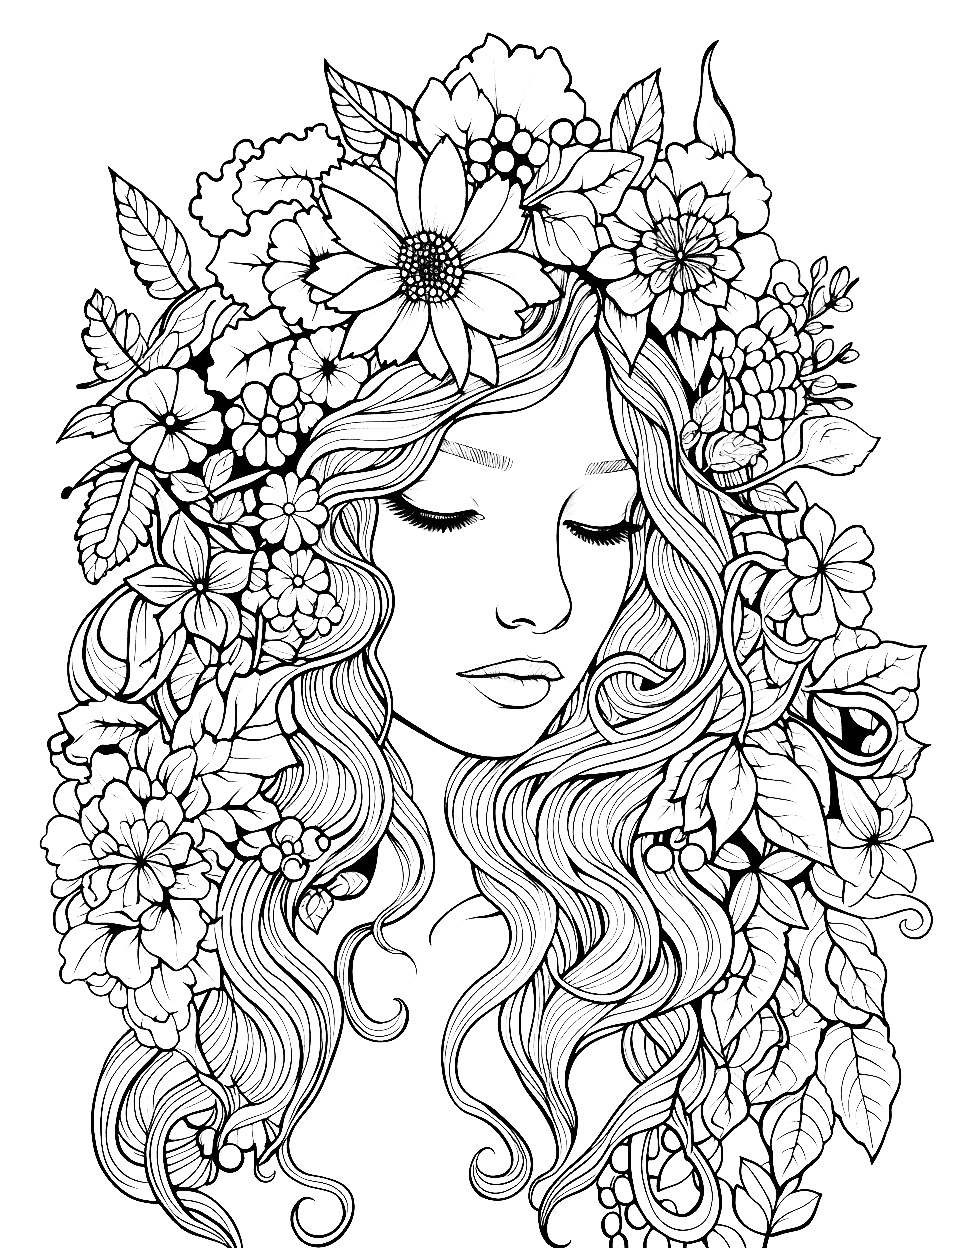 Girl's Floral Decor Adult Coloring Page - A girl adorned with wildflowers.